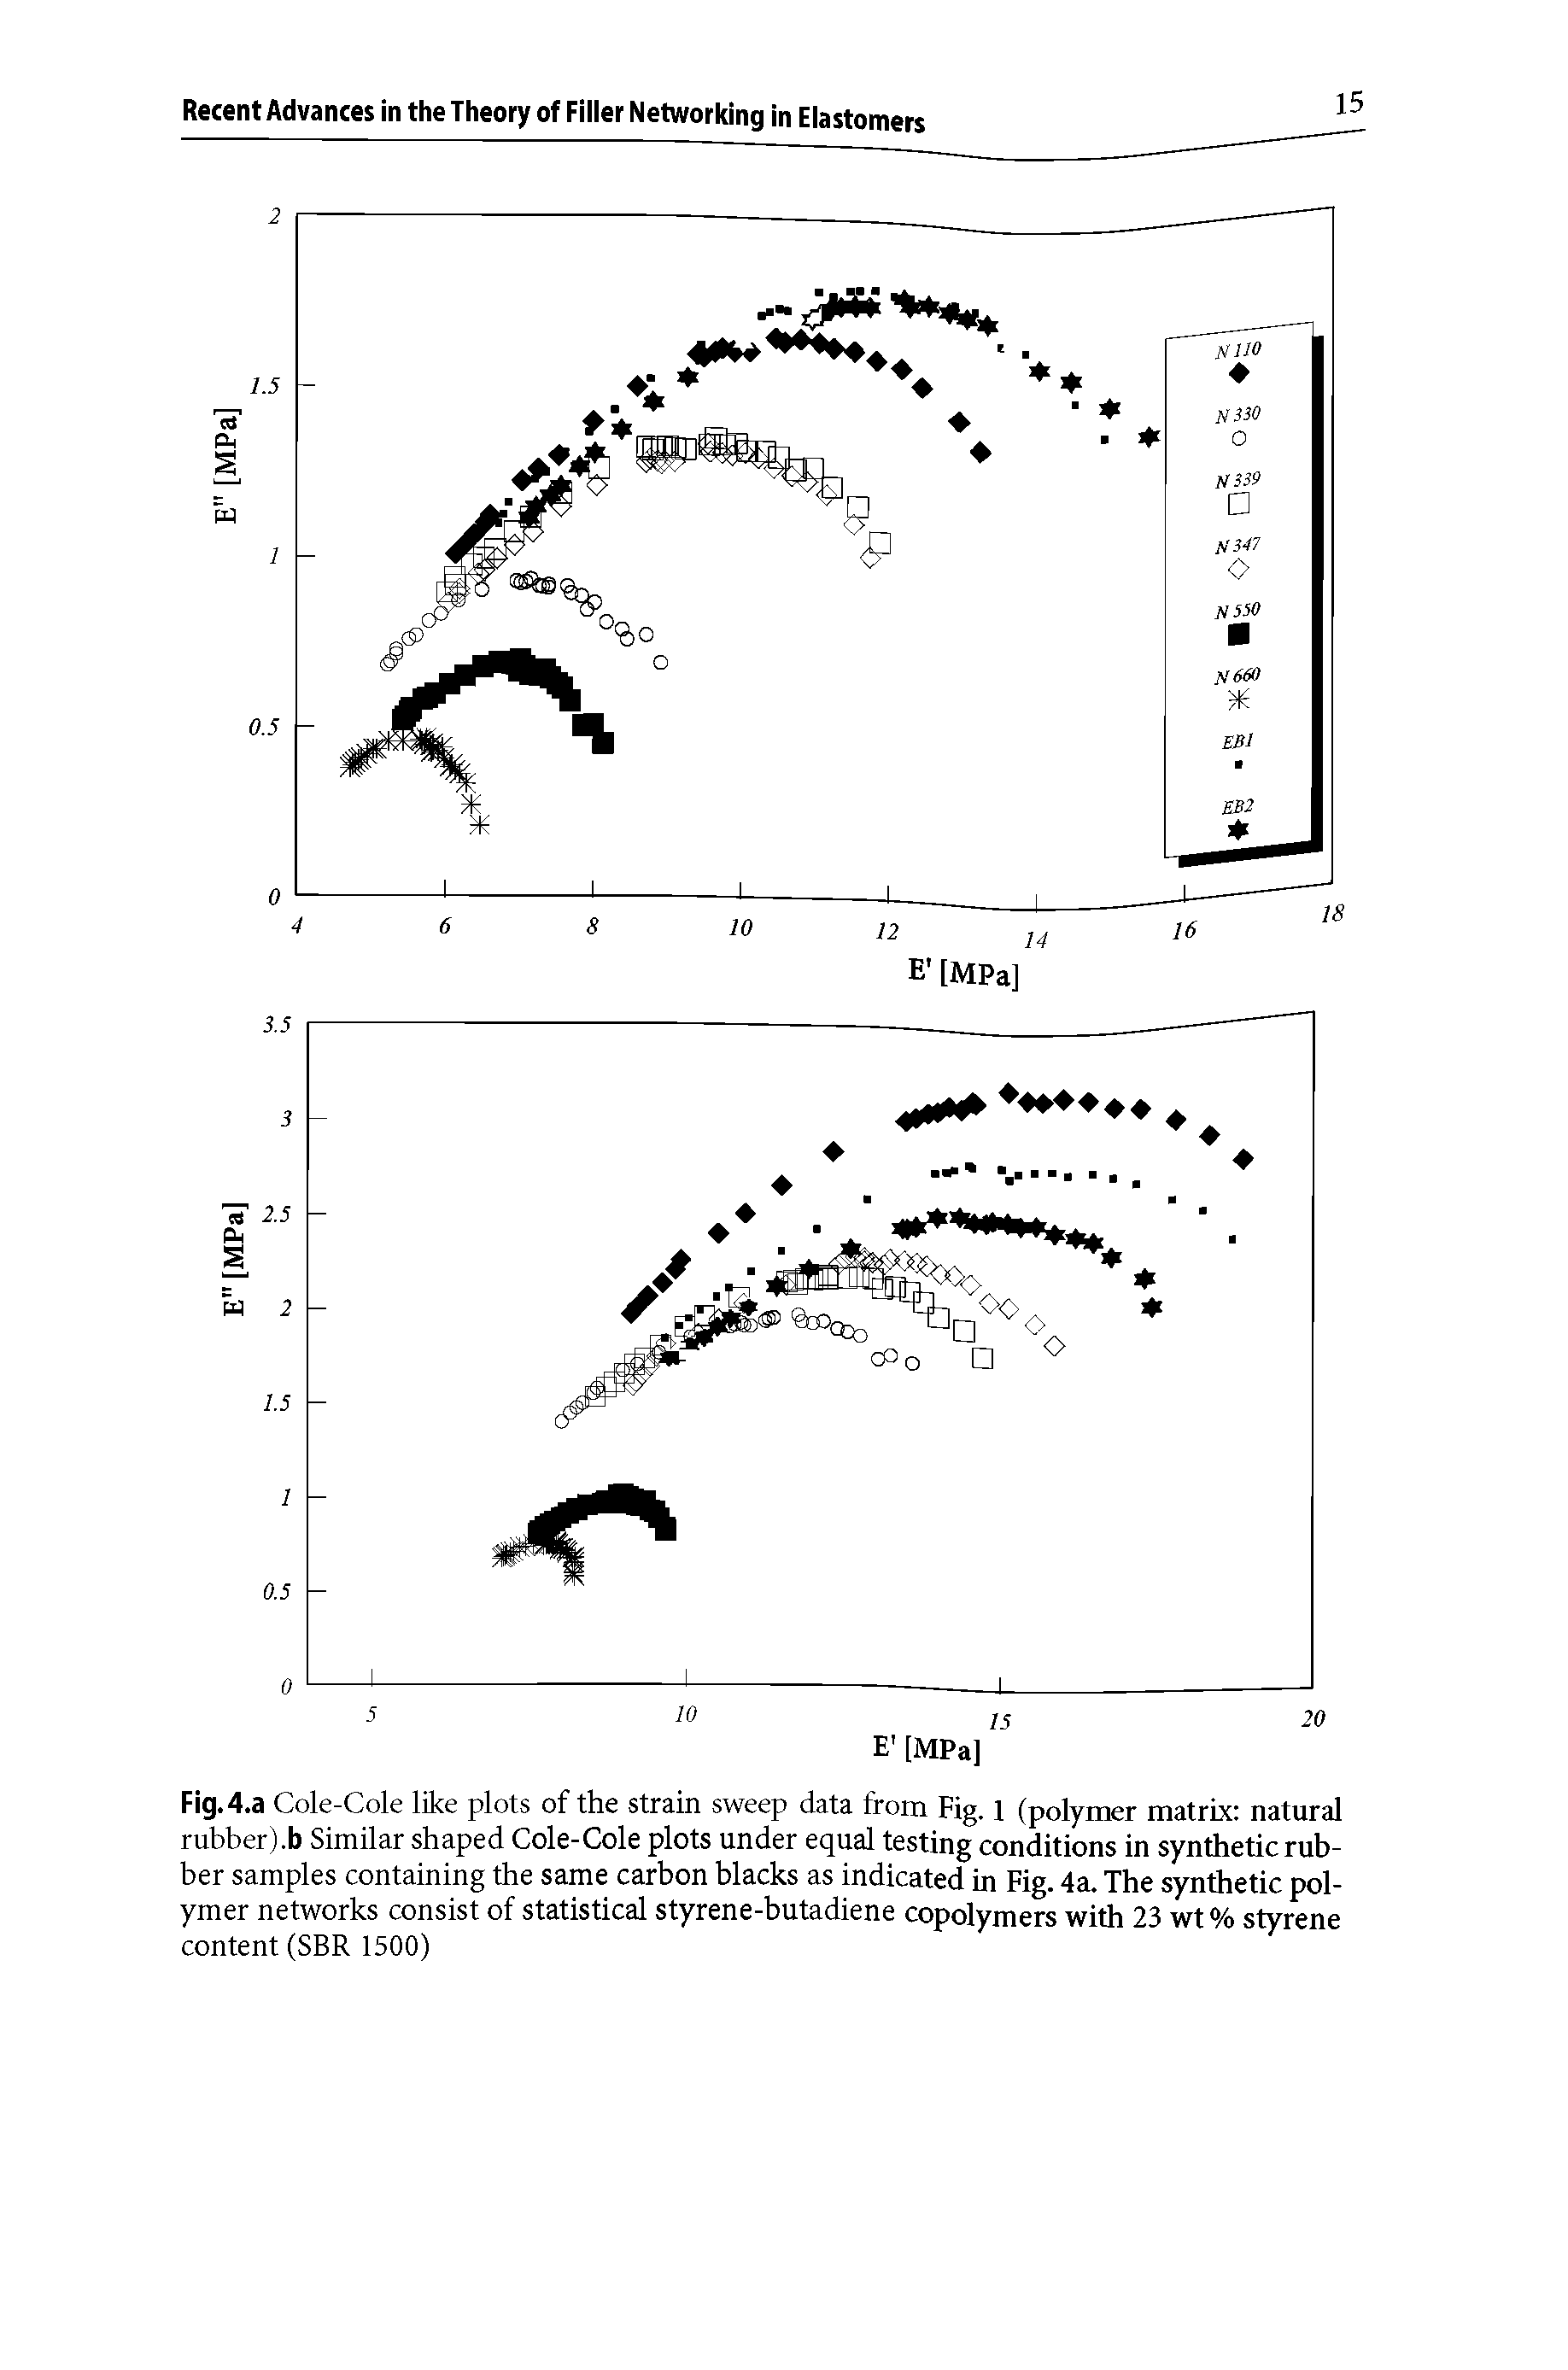 Fig.4.a Cole-Cole like plots of the strain sweep data from Fig. 1 (polymer matrix natural rubber).b Similar shaped Cole-Cole plots under equal testing conditions in synthetic rubber samples containing the same carbon blacks as indicated in Fig. 4a. The synthetic polymer networks consist of statistical styrene-butadiene copolymers with 23 wt % styrene content (SBR 1500)...